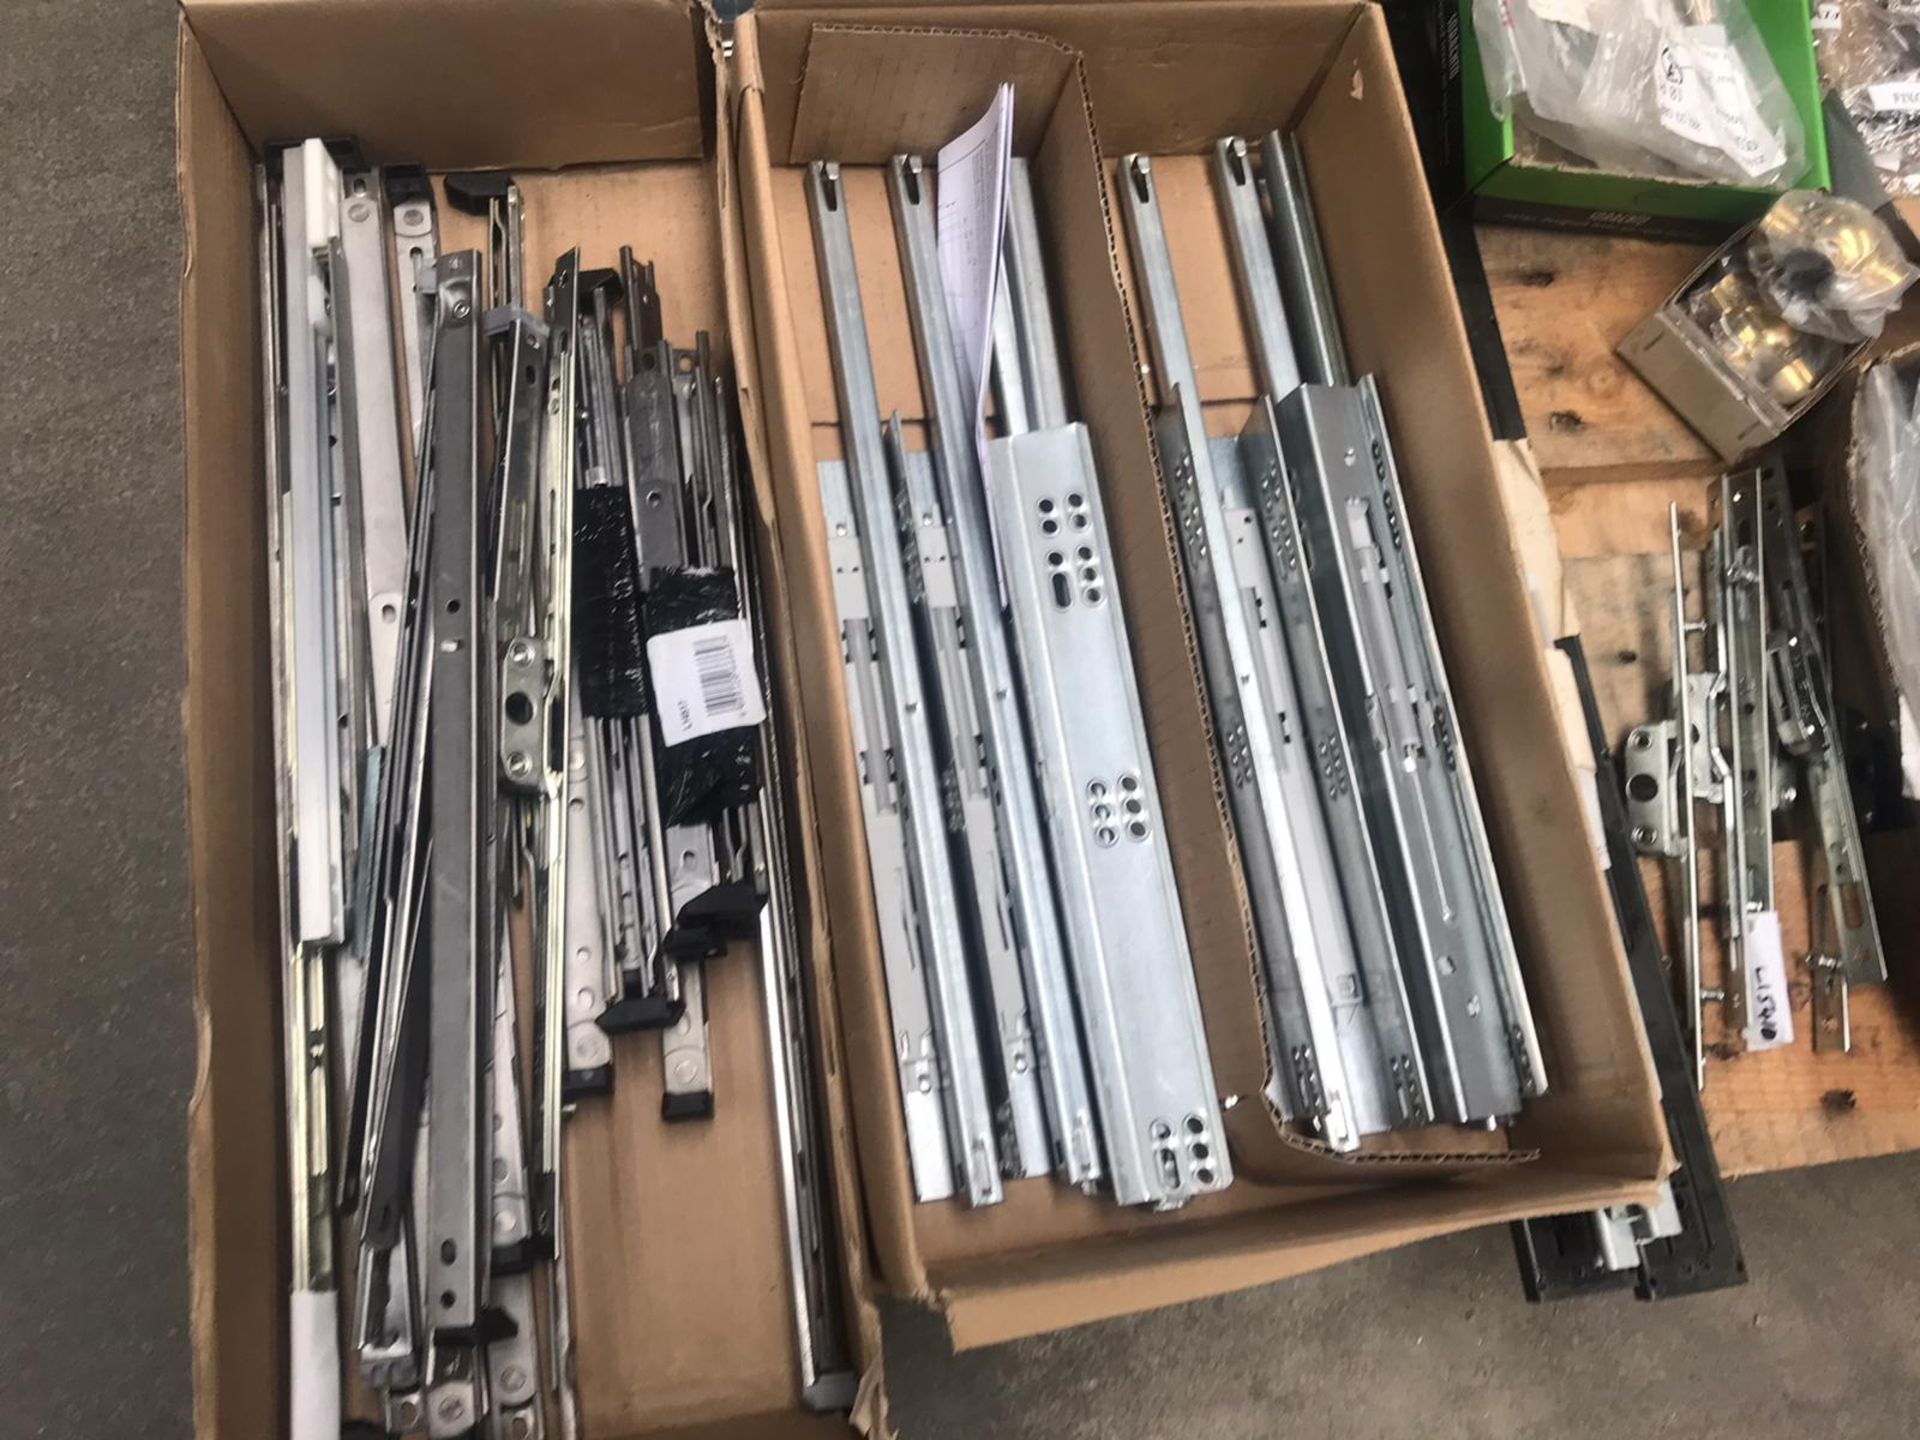 1 x Assorted Pallet Job Lot of Various Door and Drawer Accessories - Includes Drawer Runners, - Image 15 of 16